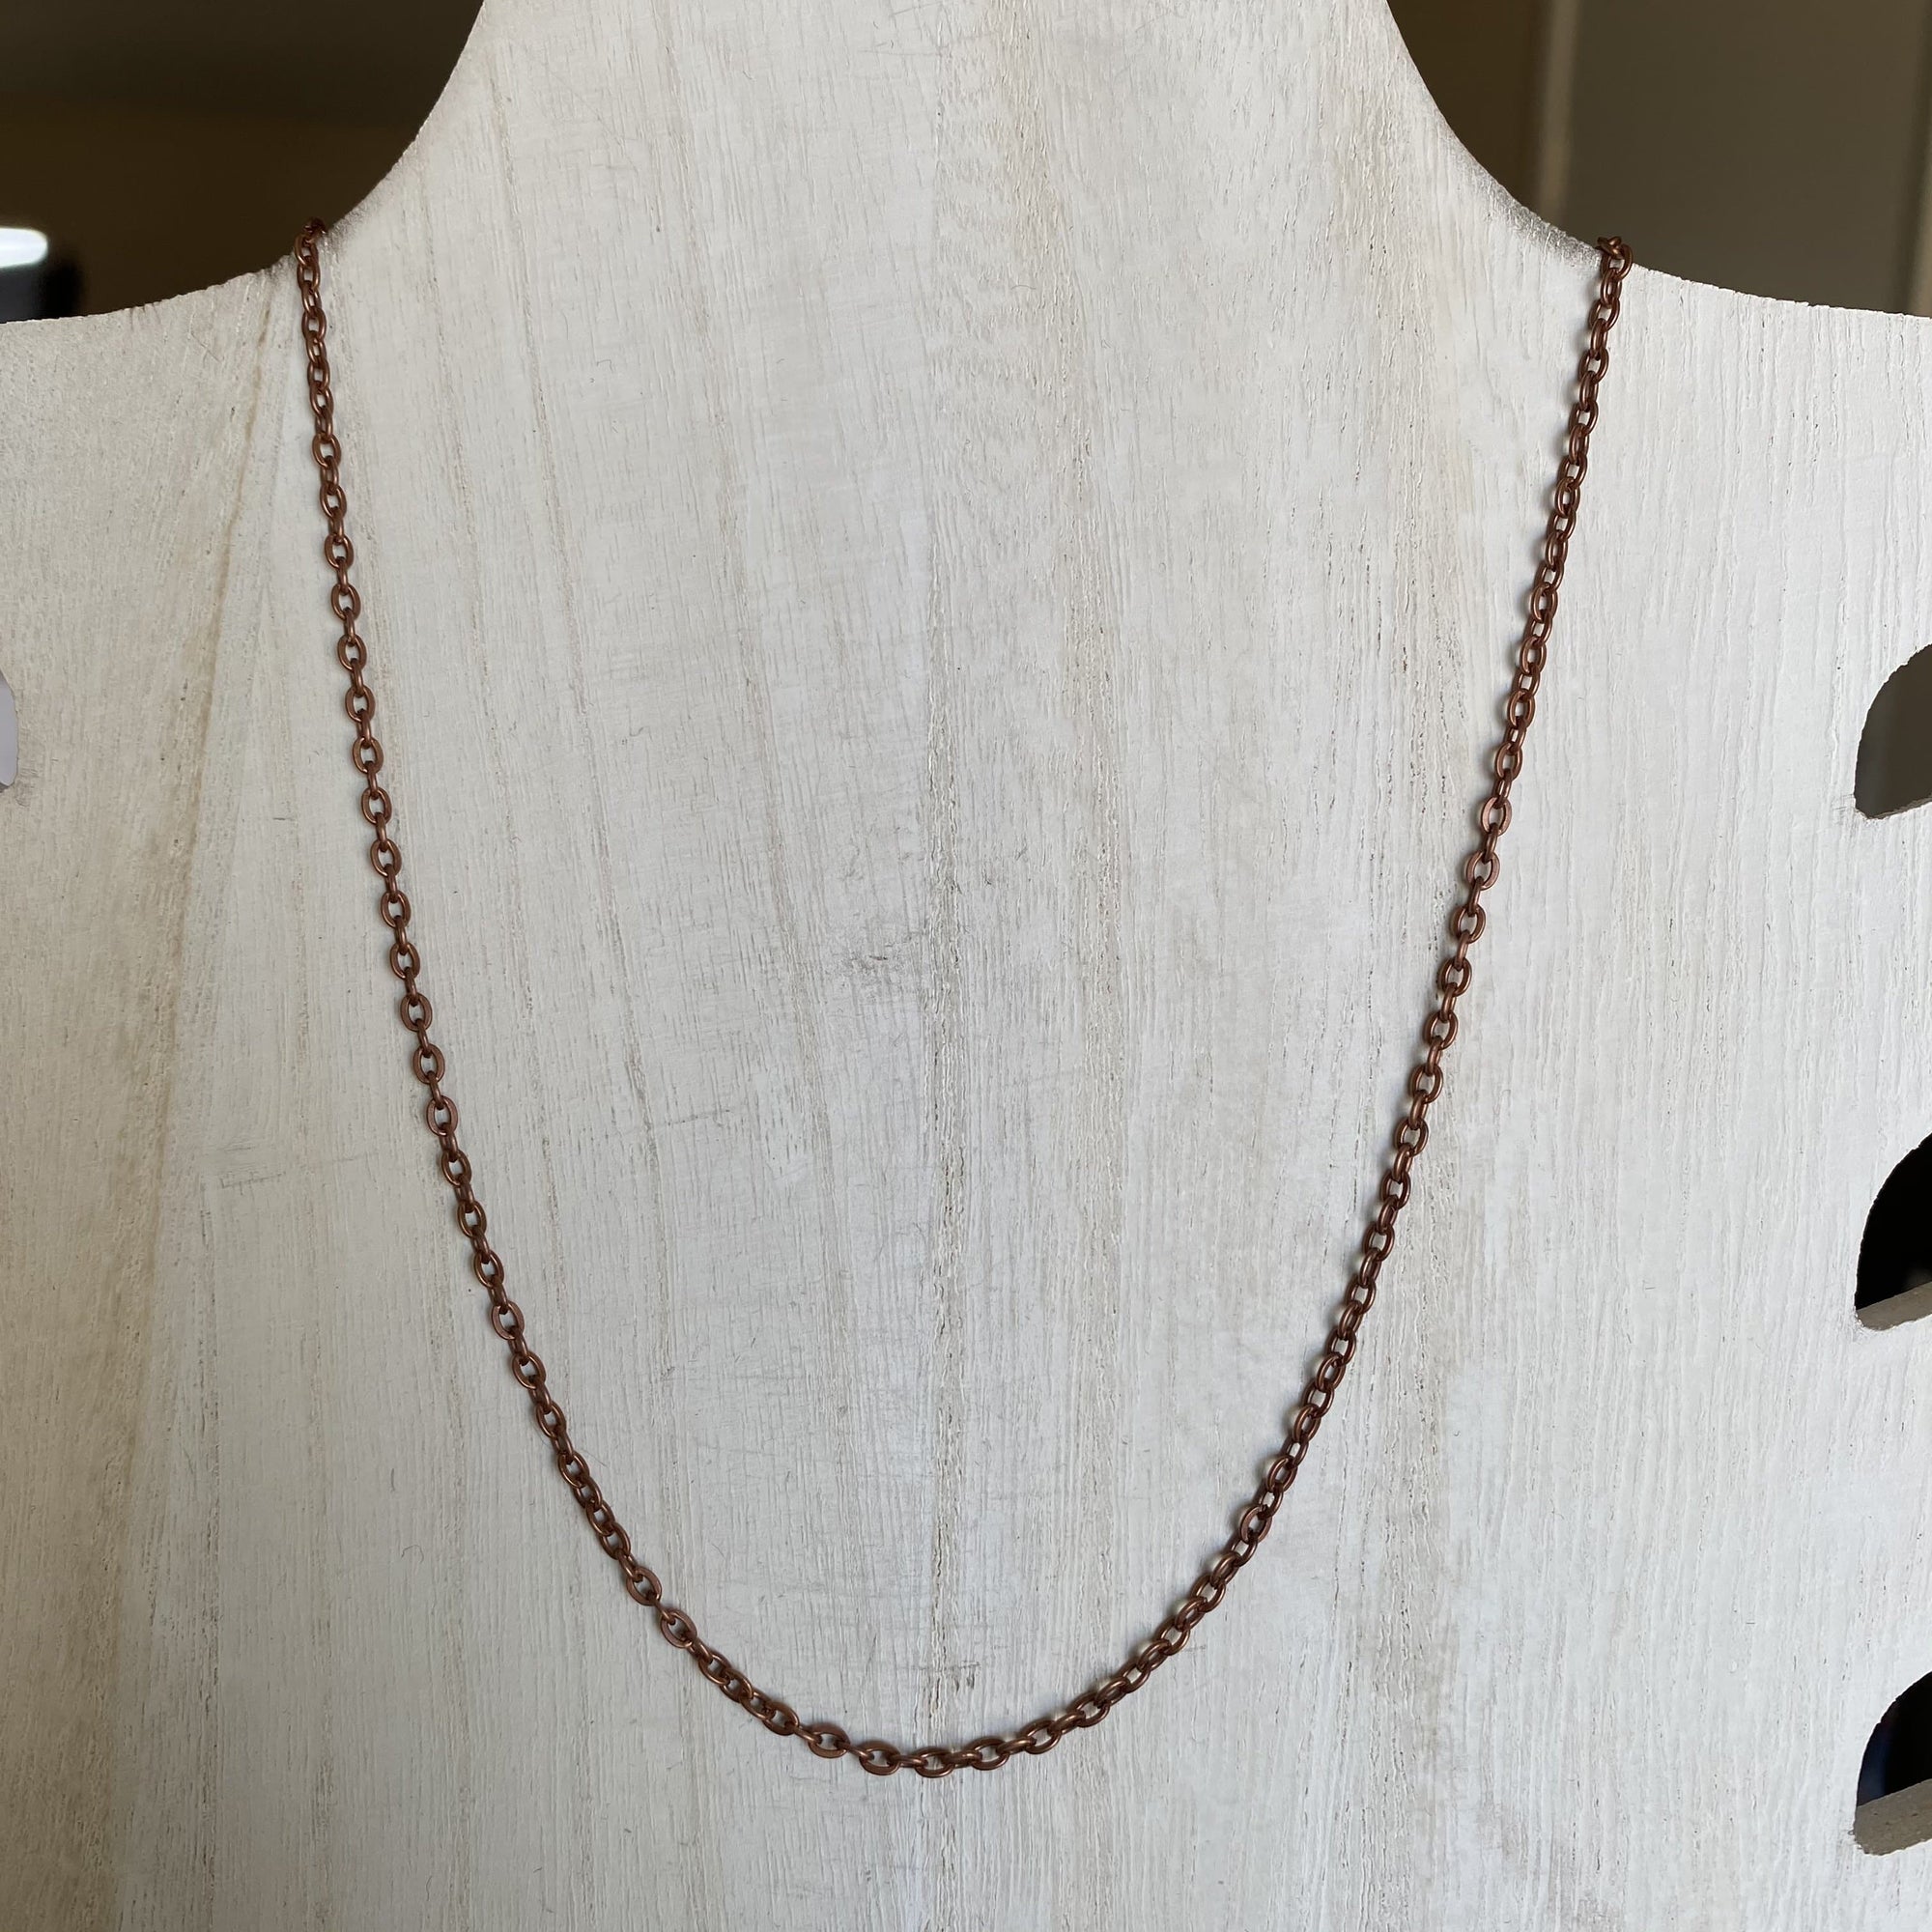 Red Copper Necklace Chain - 18in